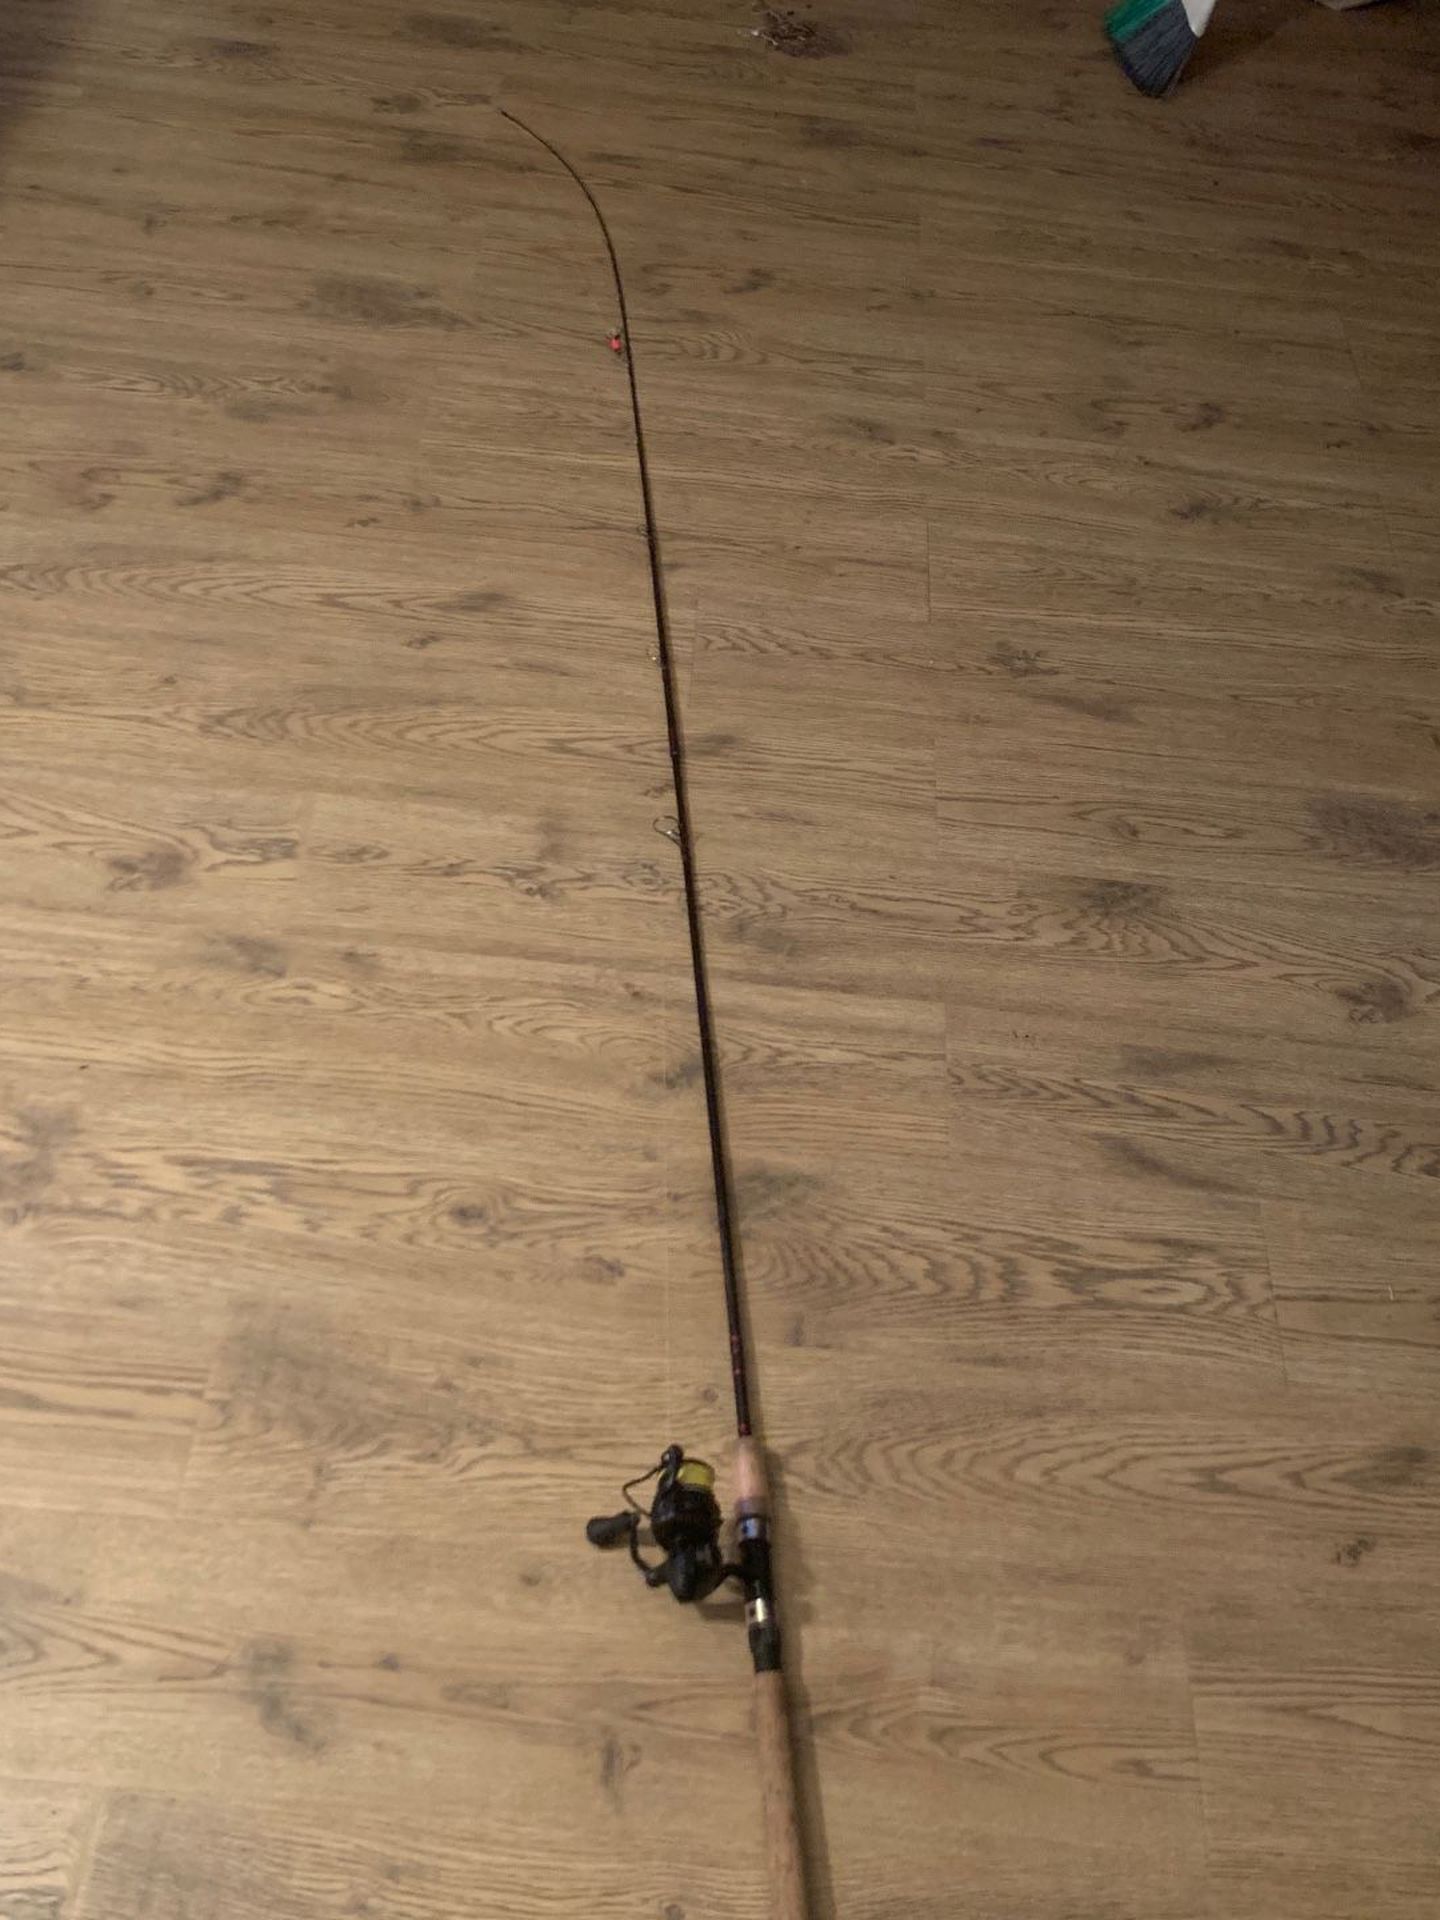 Fishing reel and rod